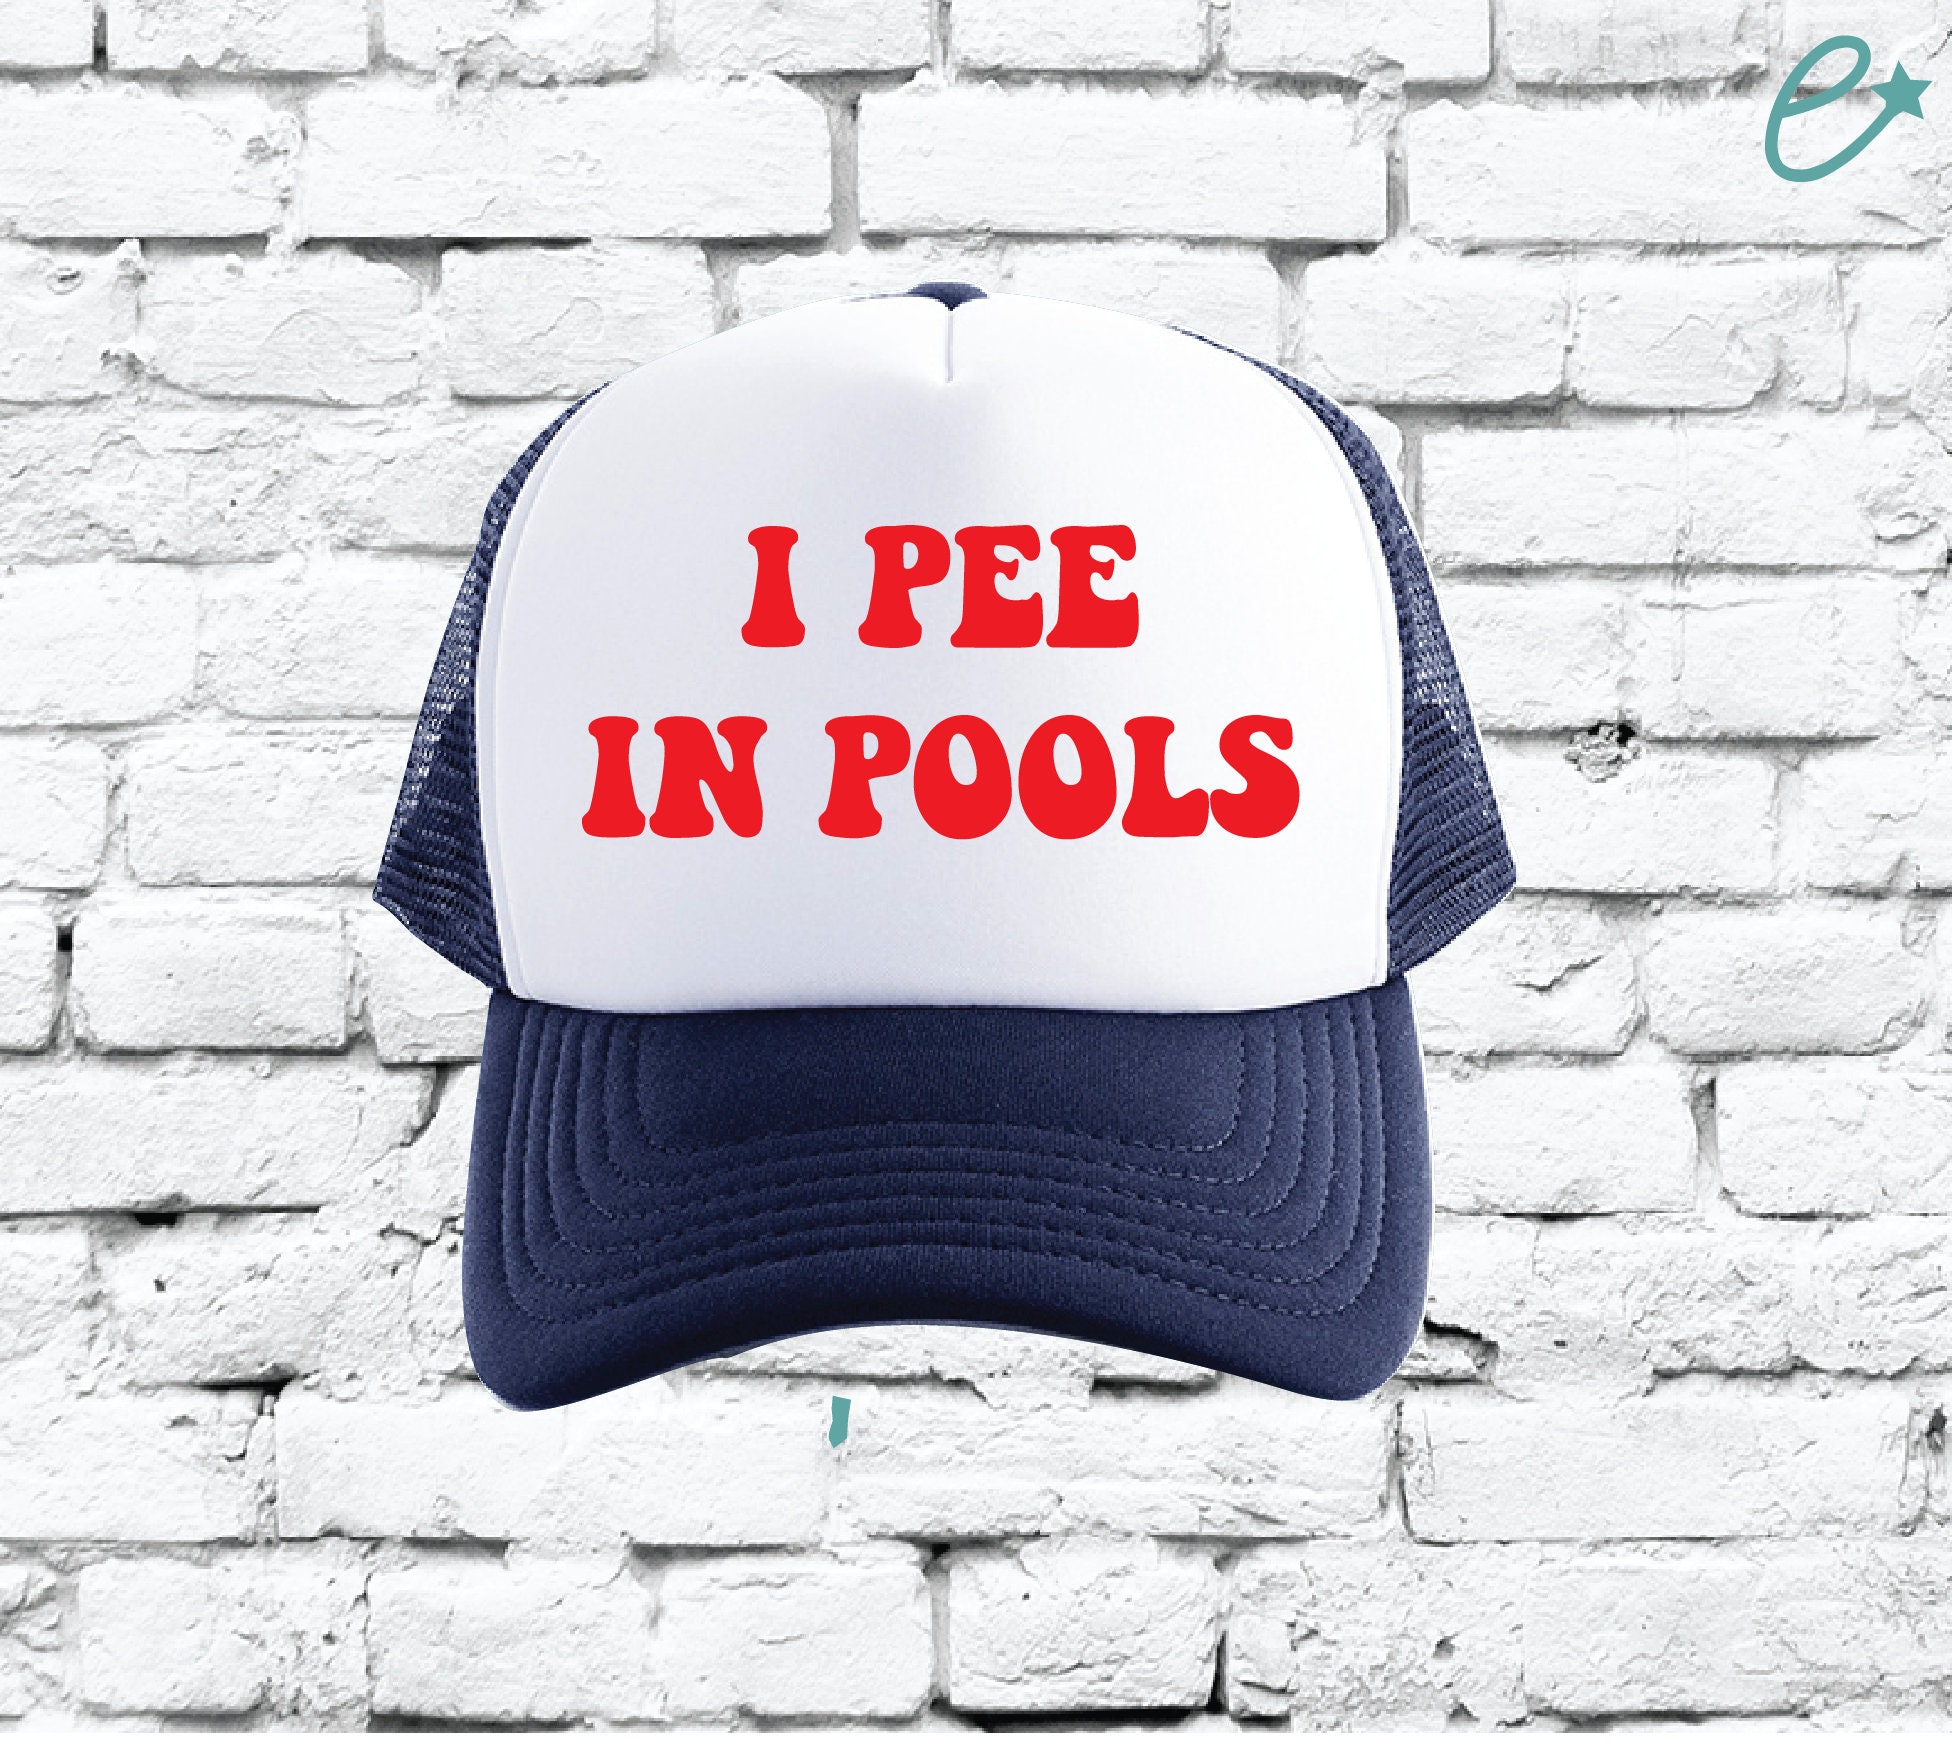 I Pee in Pools Trucker Hats Funny Mesh Back Pool Party Hats -  Canada